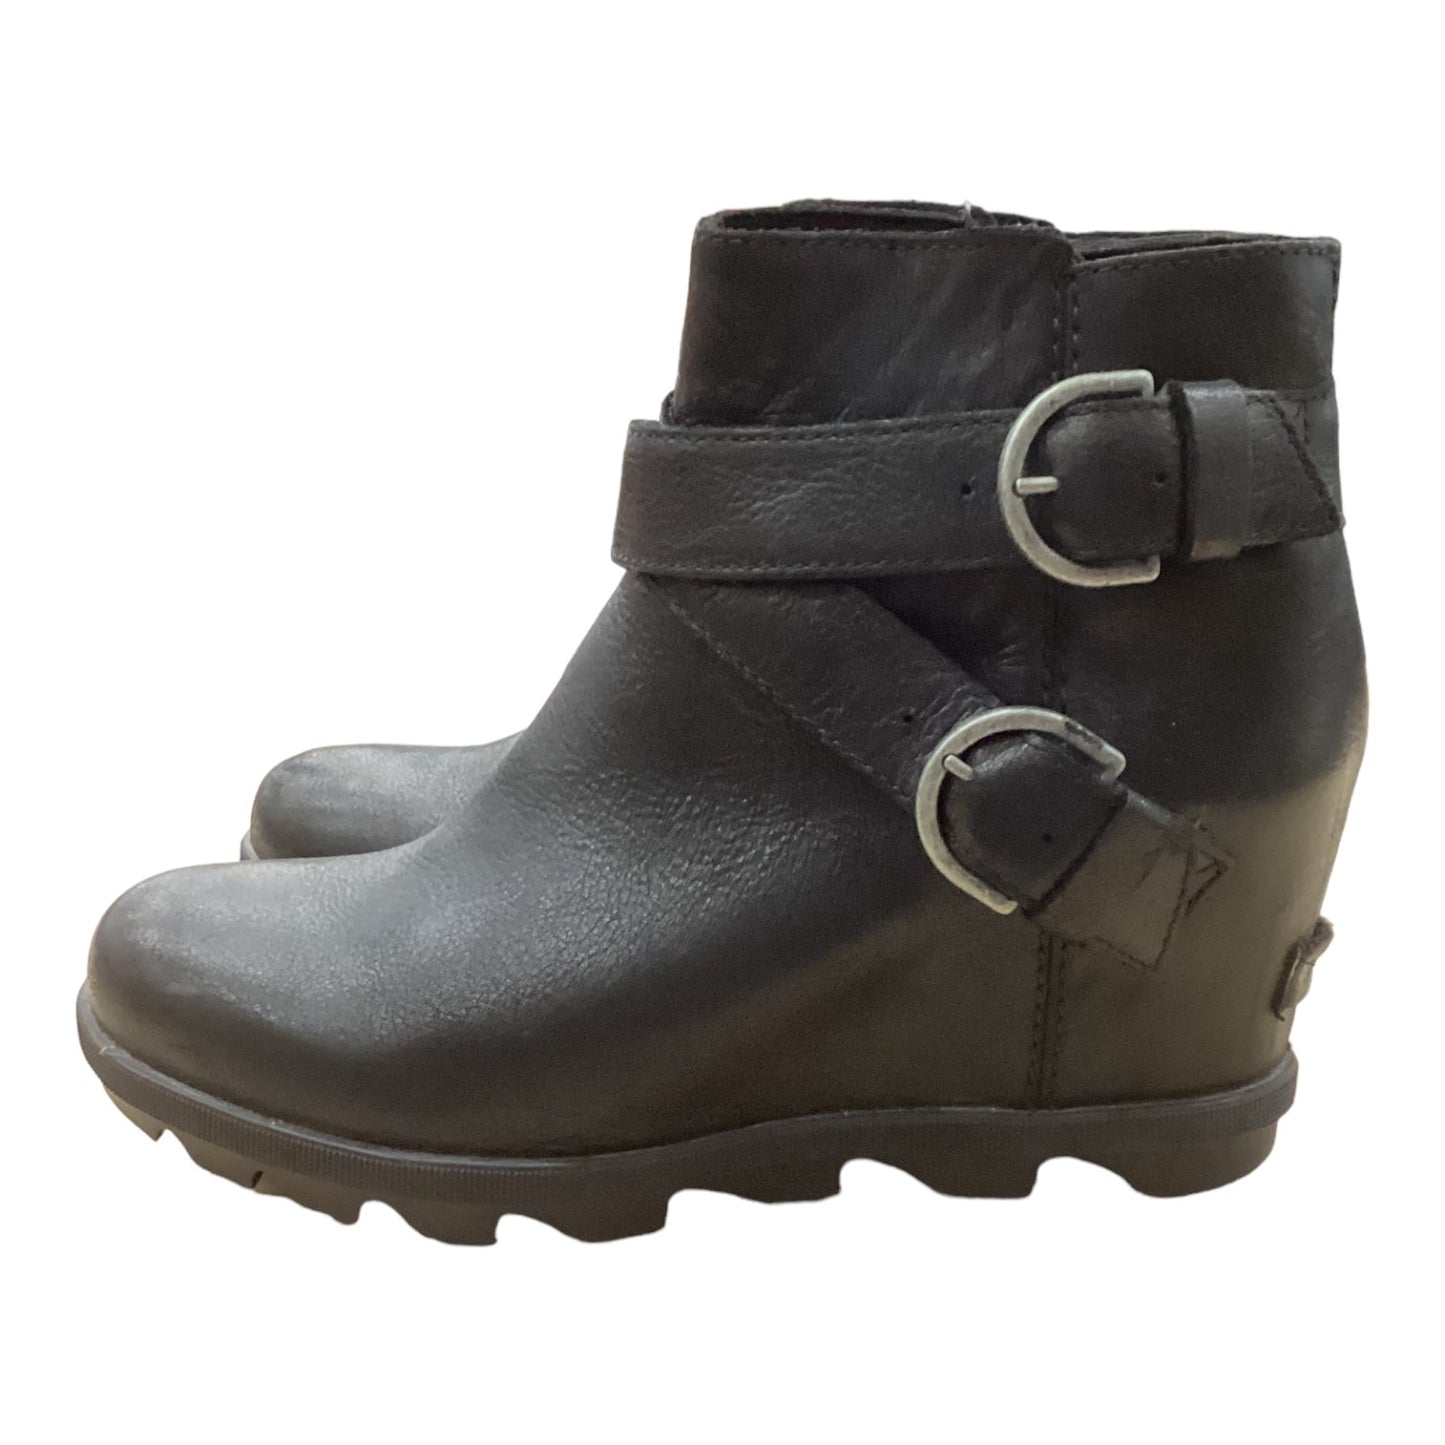 Boots Ankle Heels By Sorel  Size: 9.5